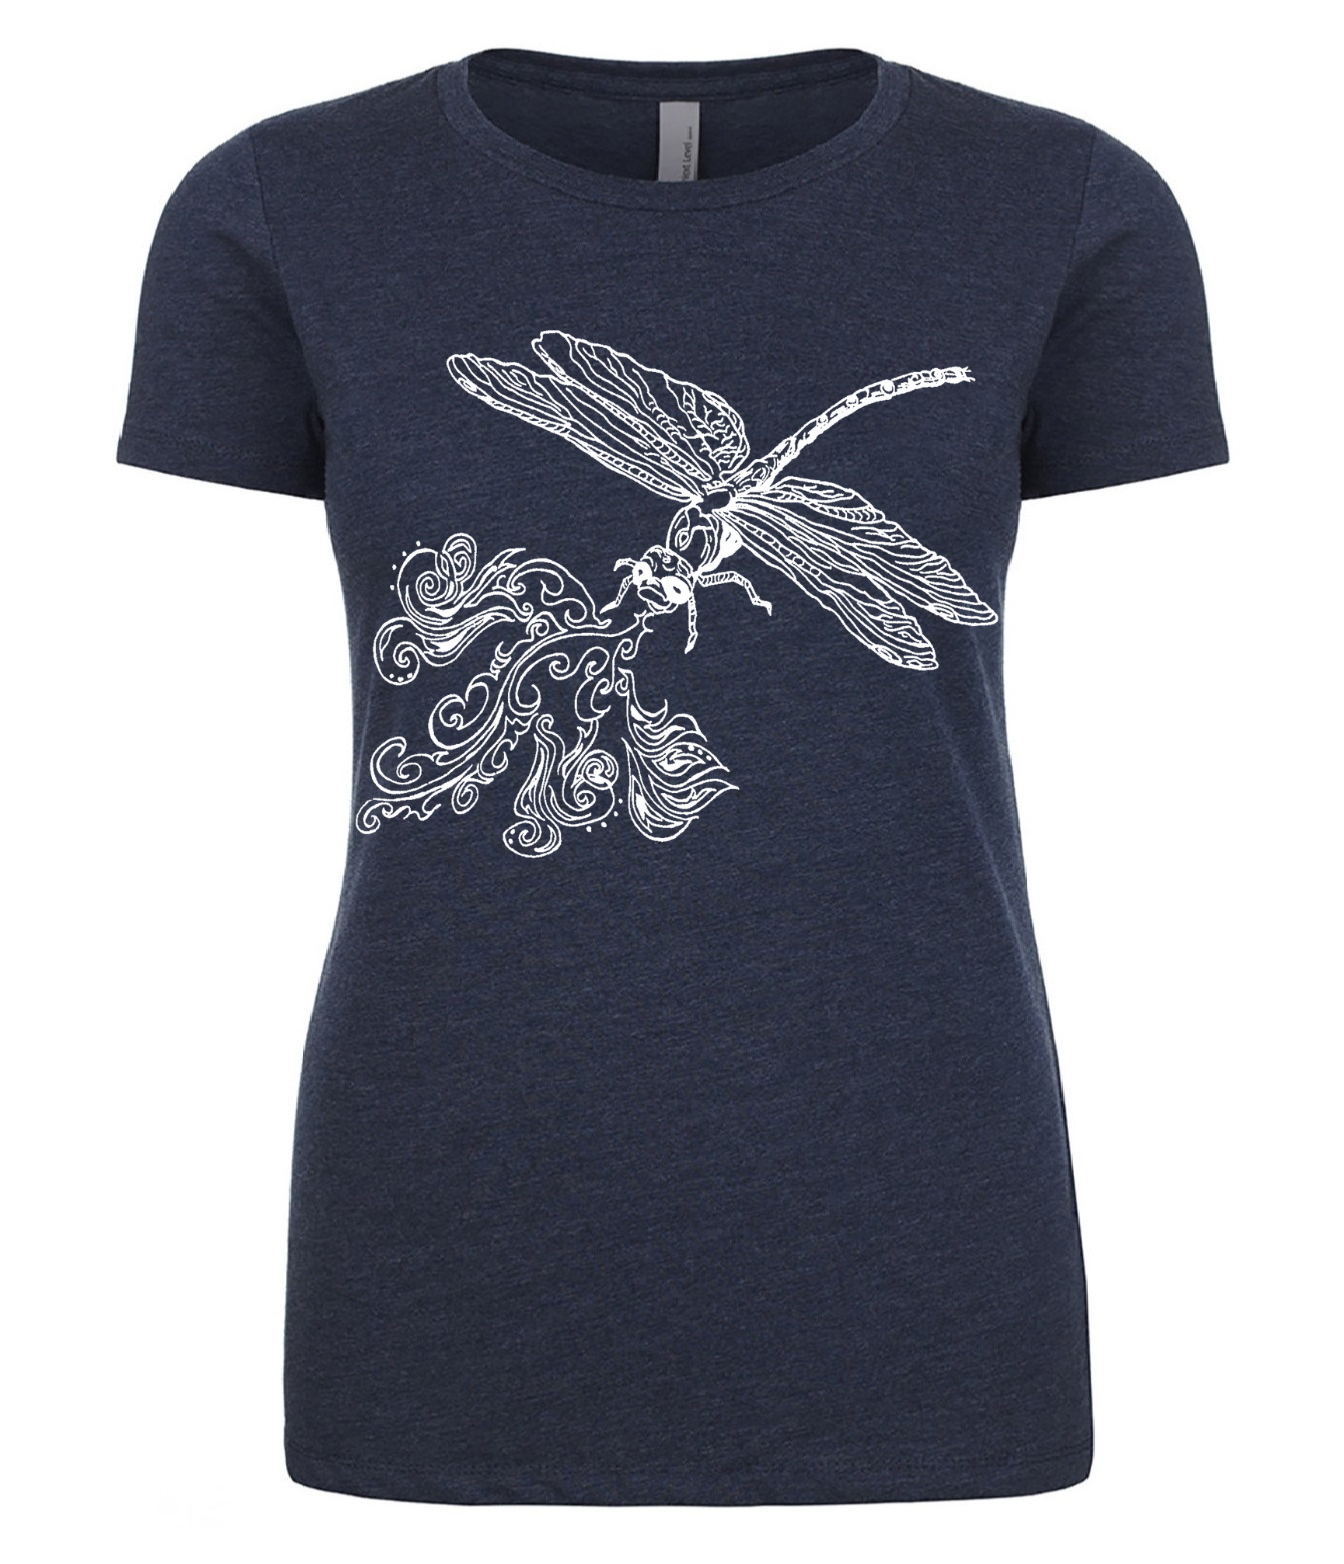 Fire Breathing Dragonfly Ladies T Shirt